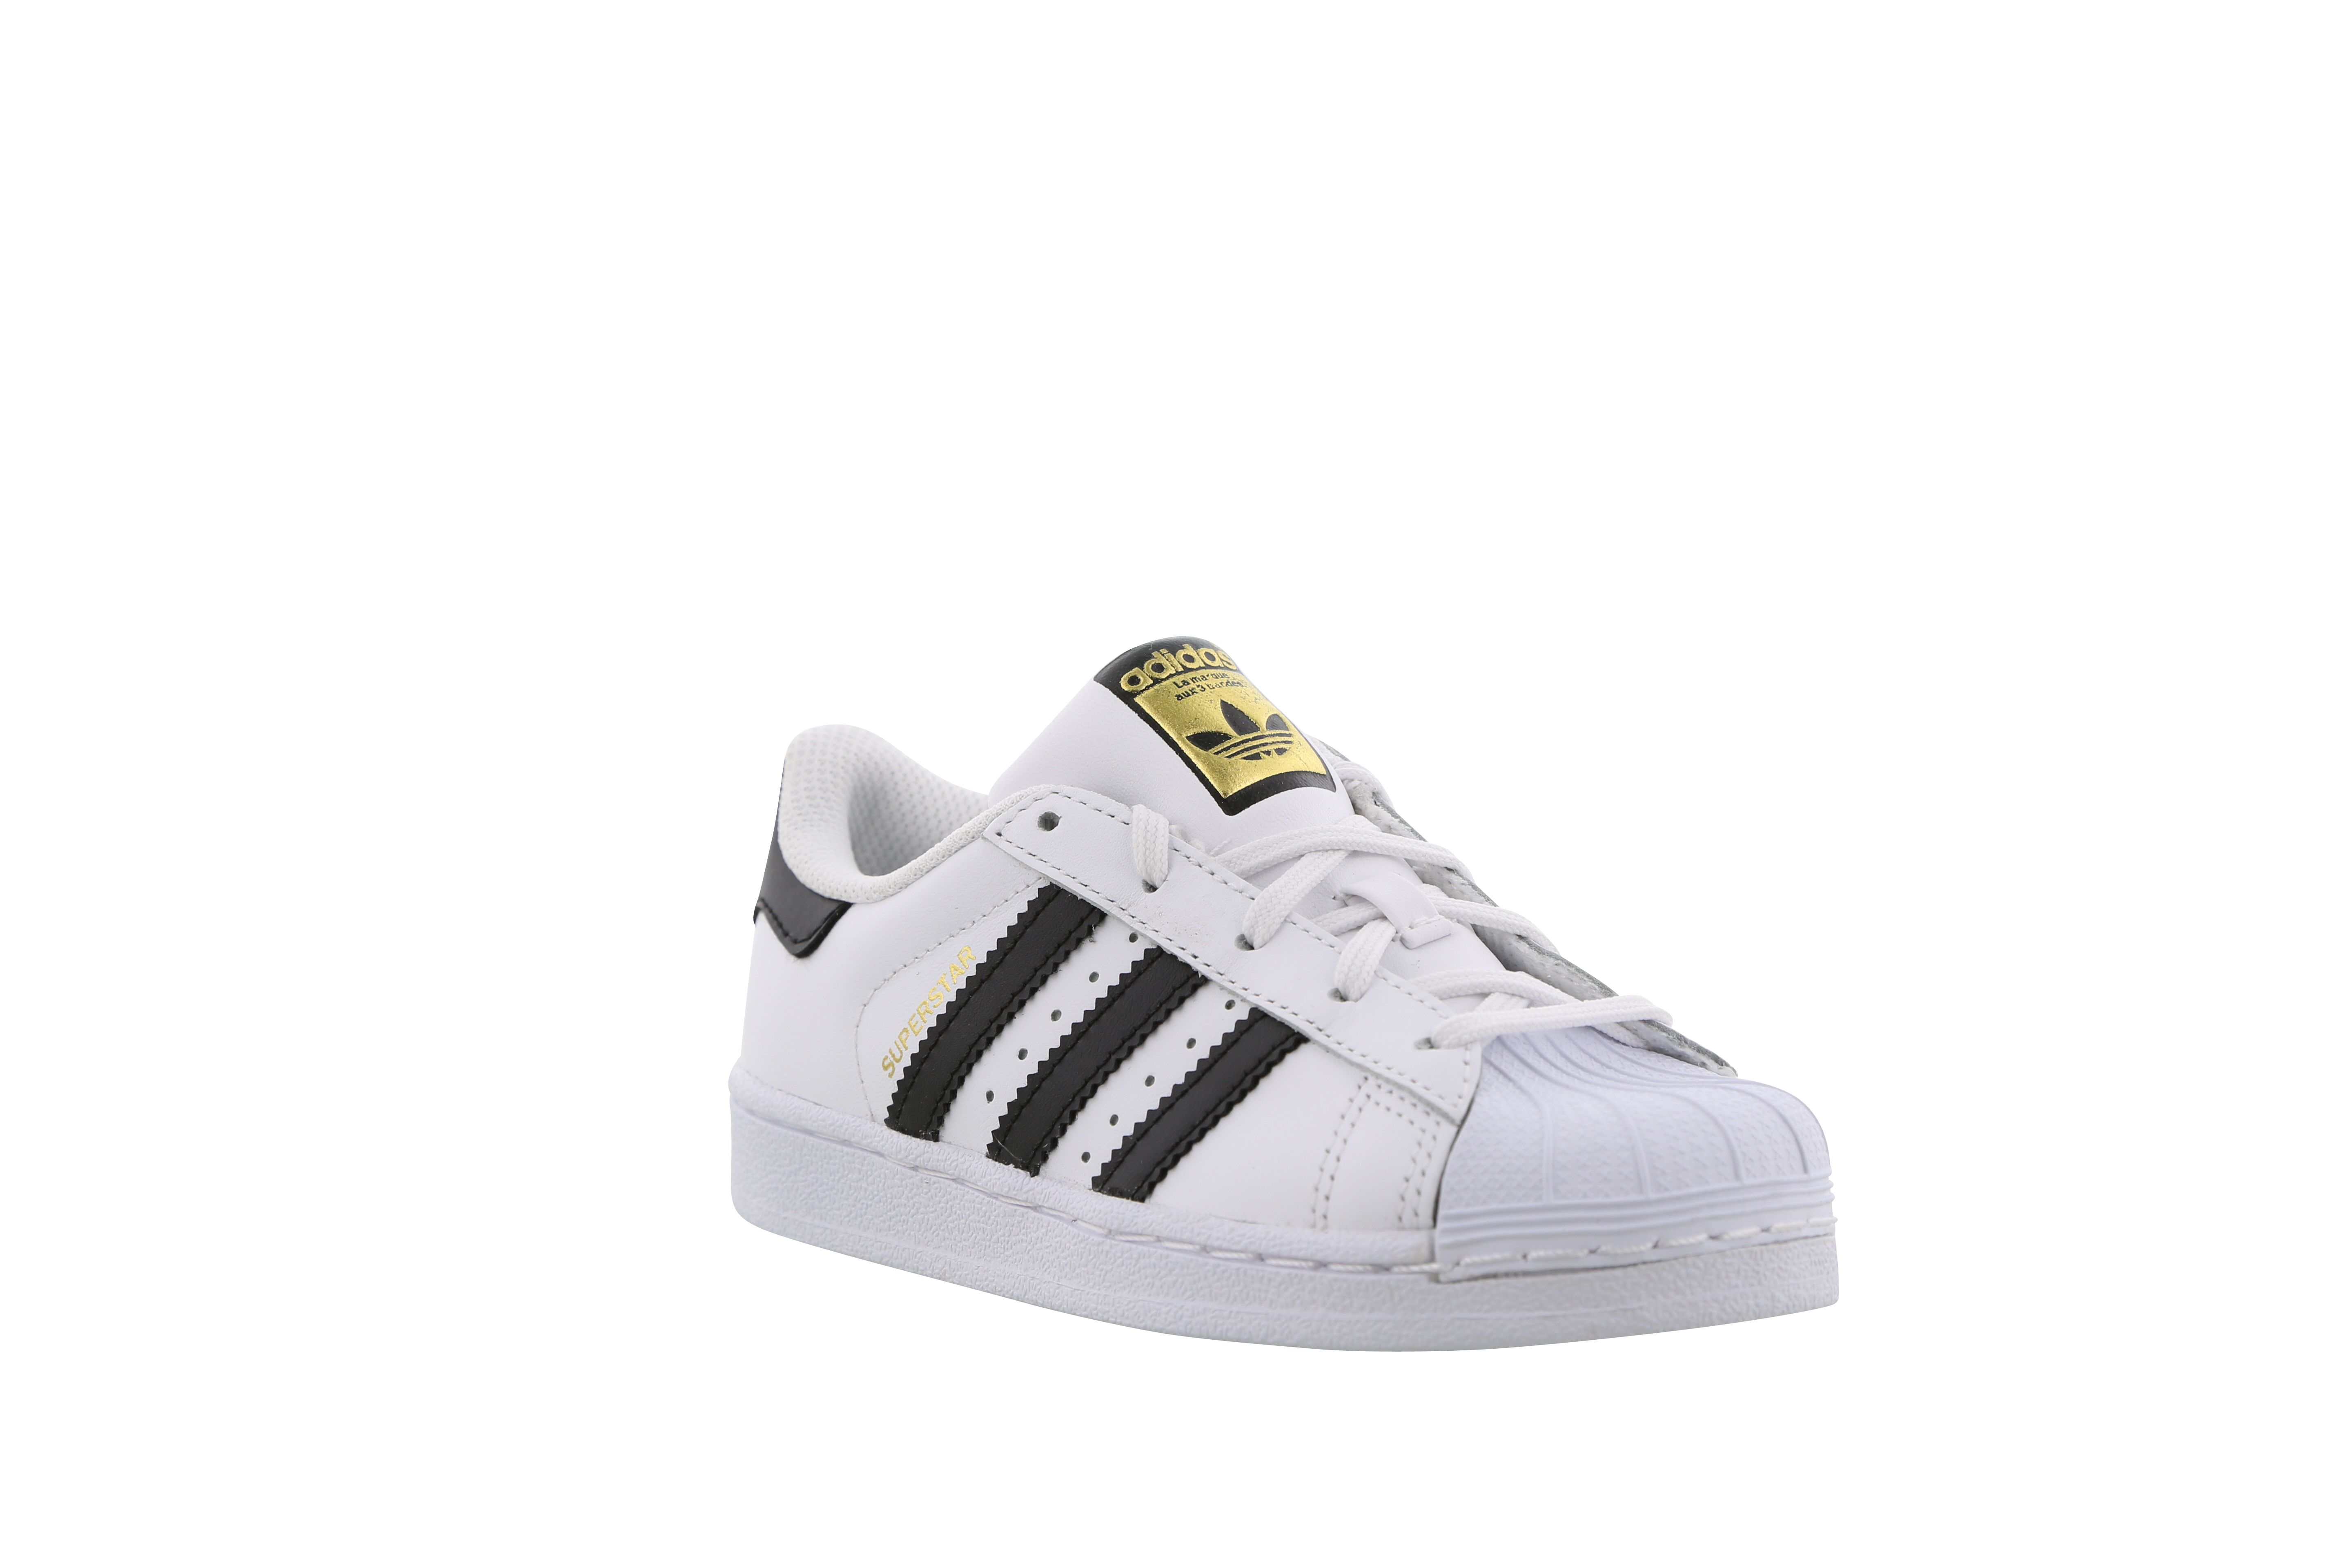 adidas superstar ii black and white